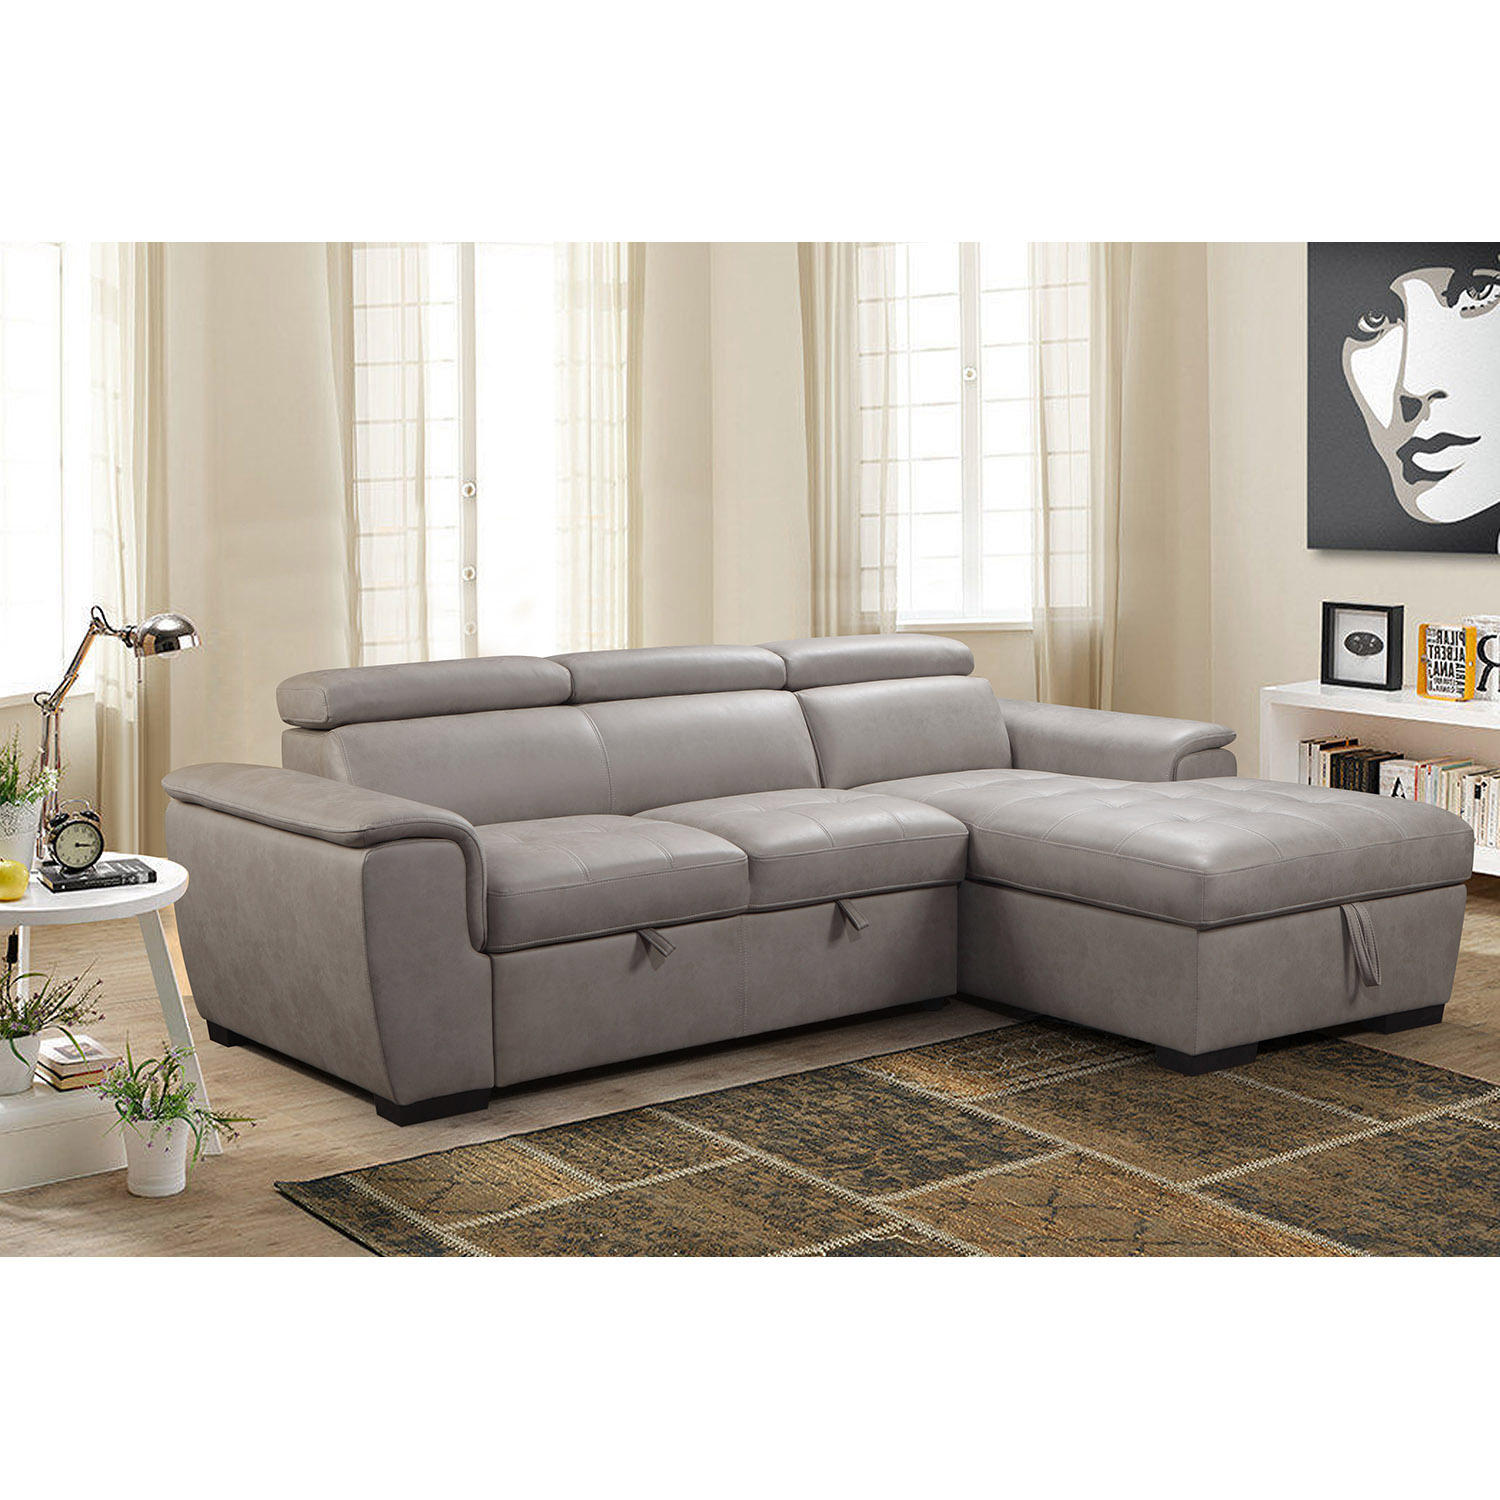 Abbyson Living Cameron Stain-Resistant Sectional Sofa with Storage and Pullout Bed